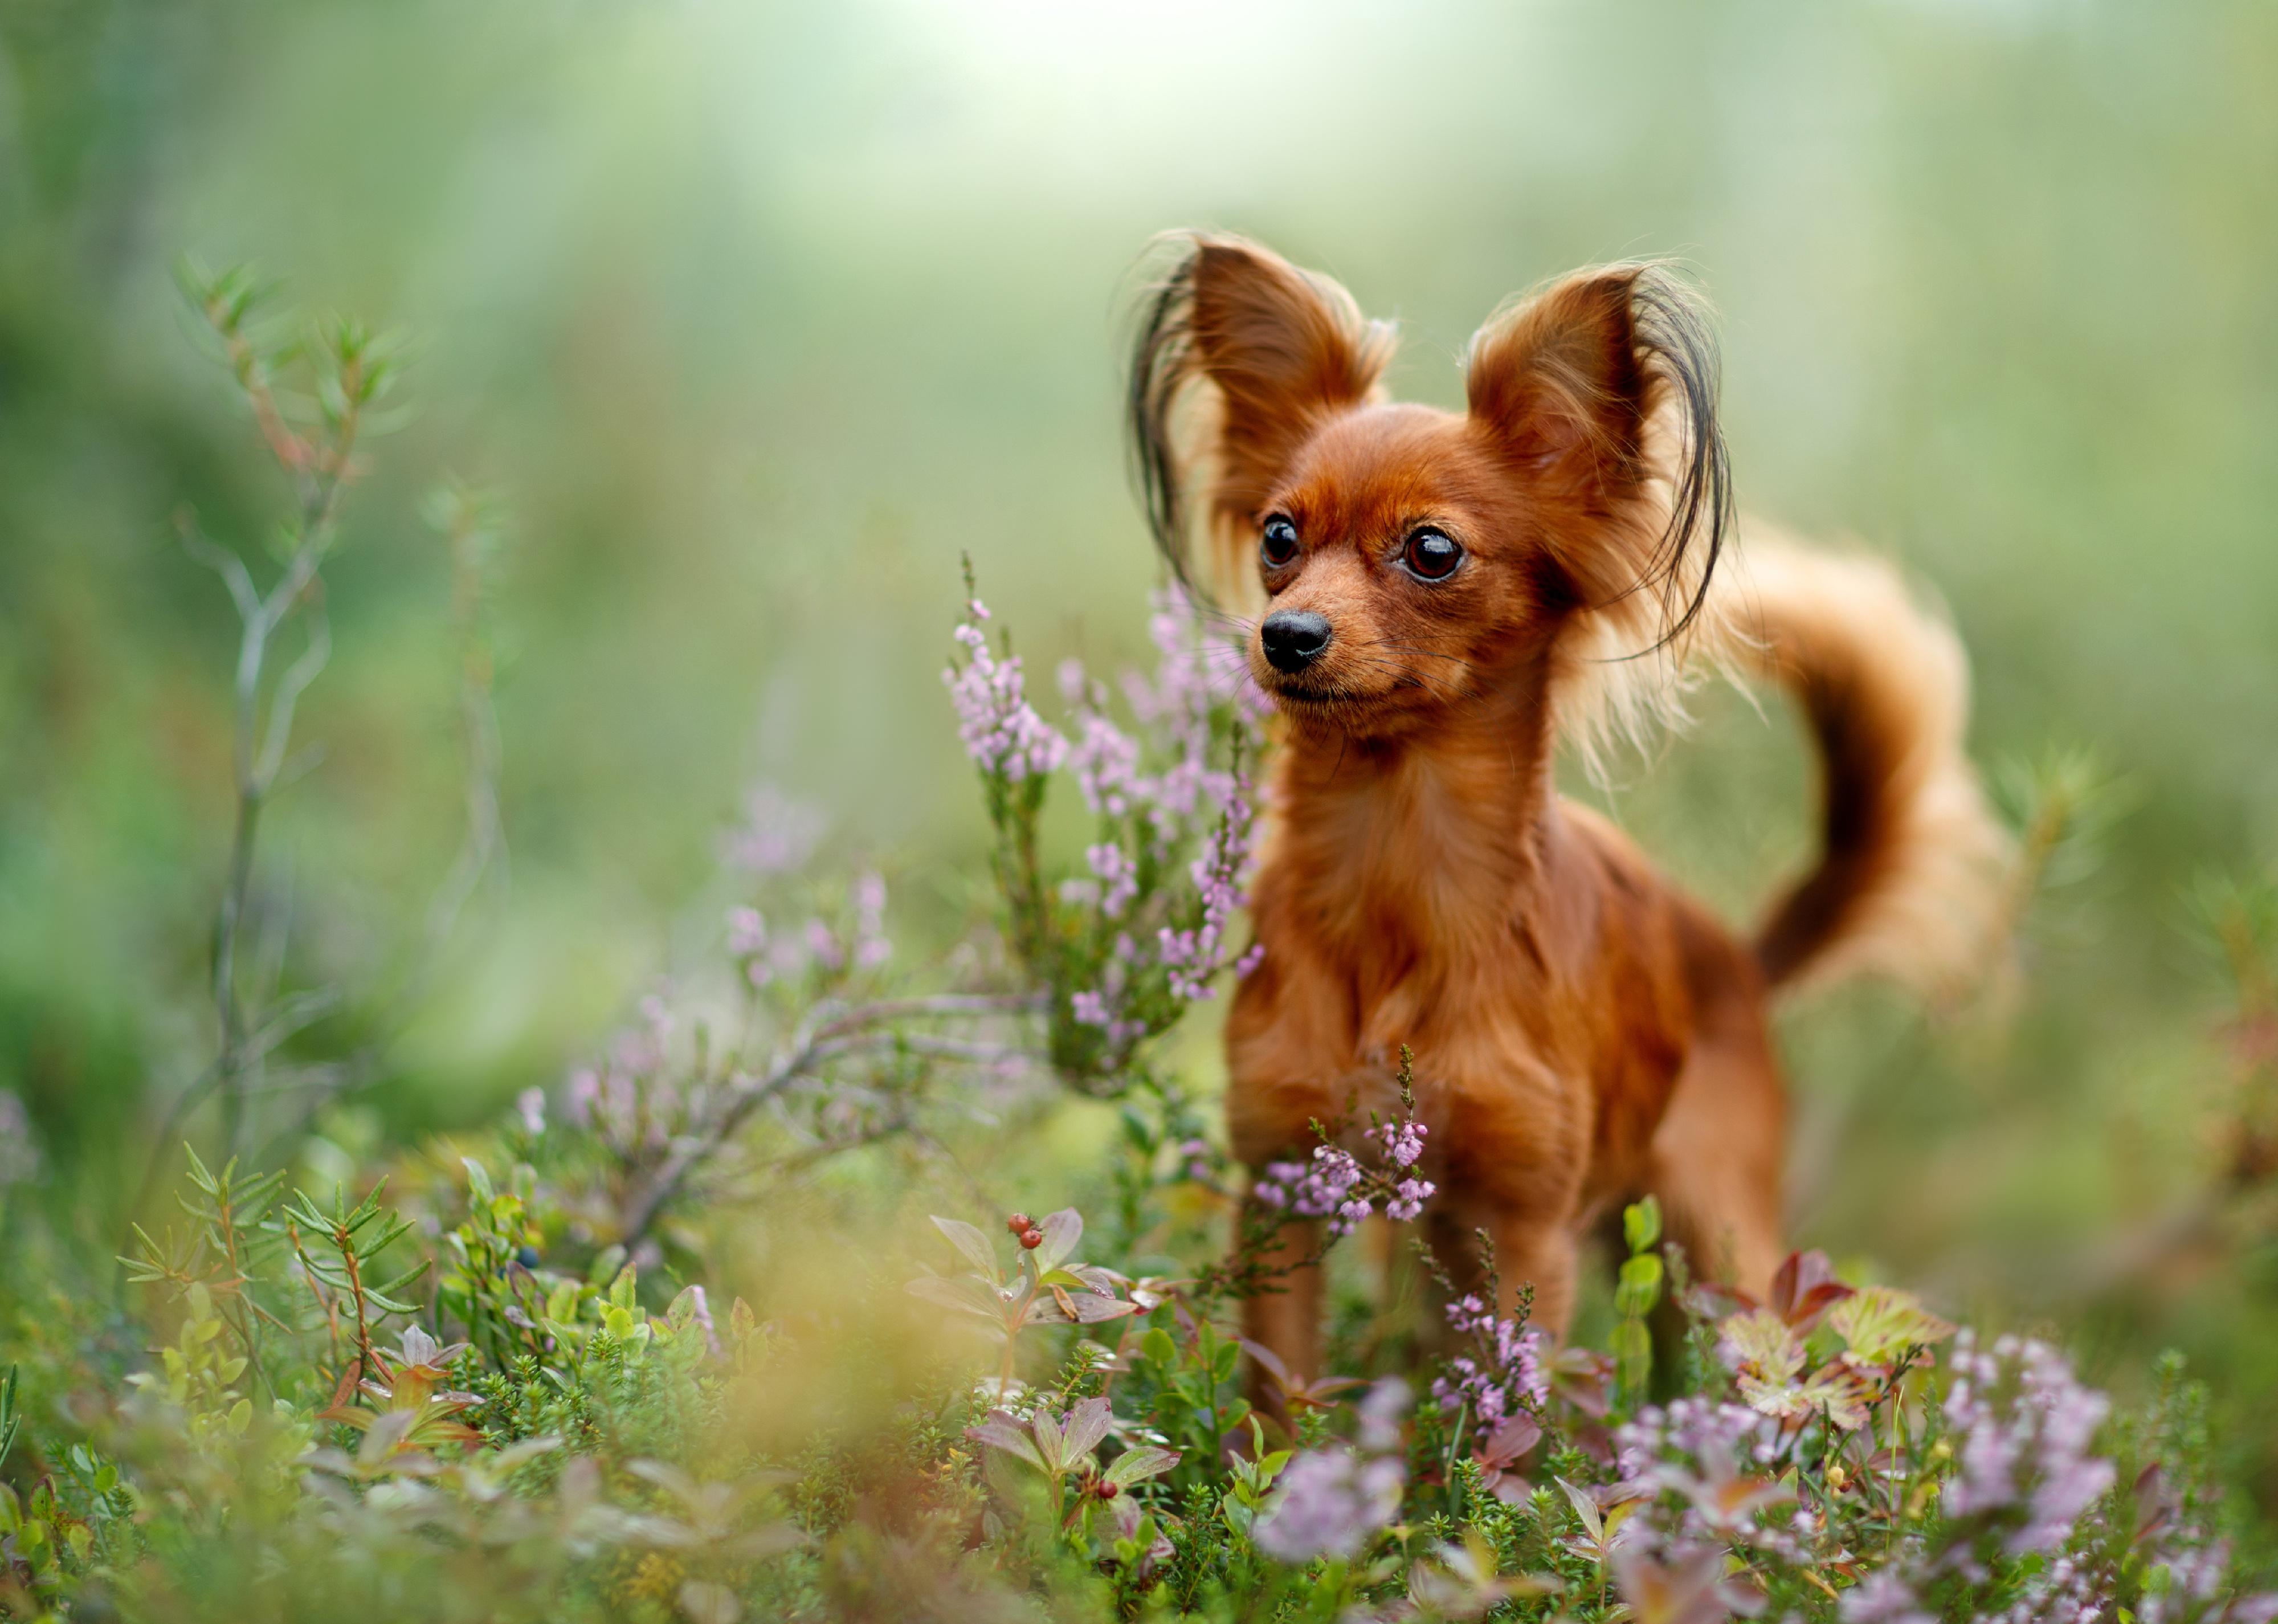 Russian Toy Terrier in the autumn forest.